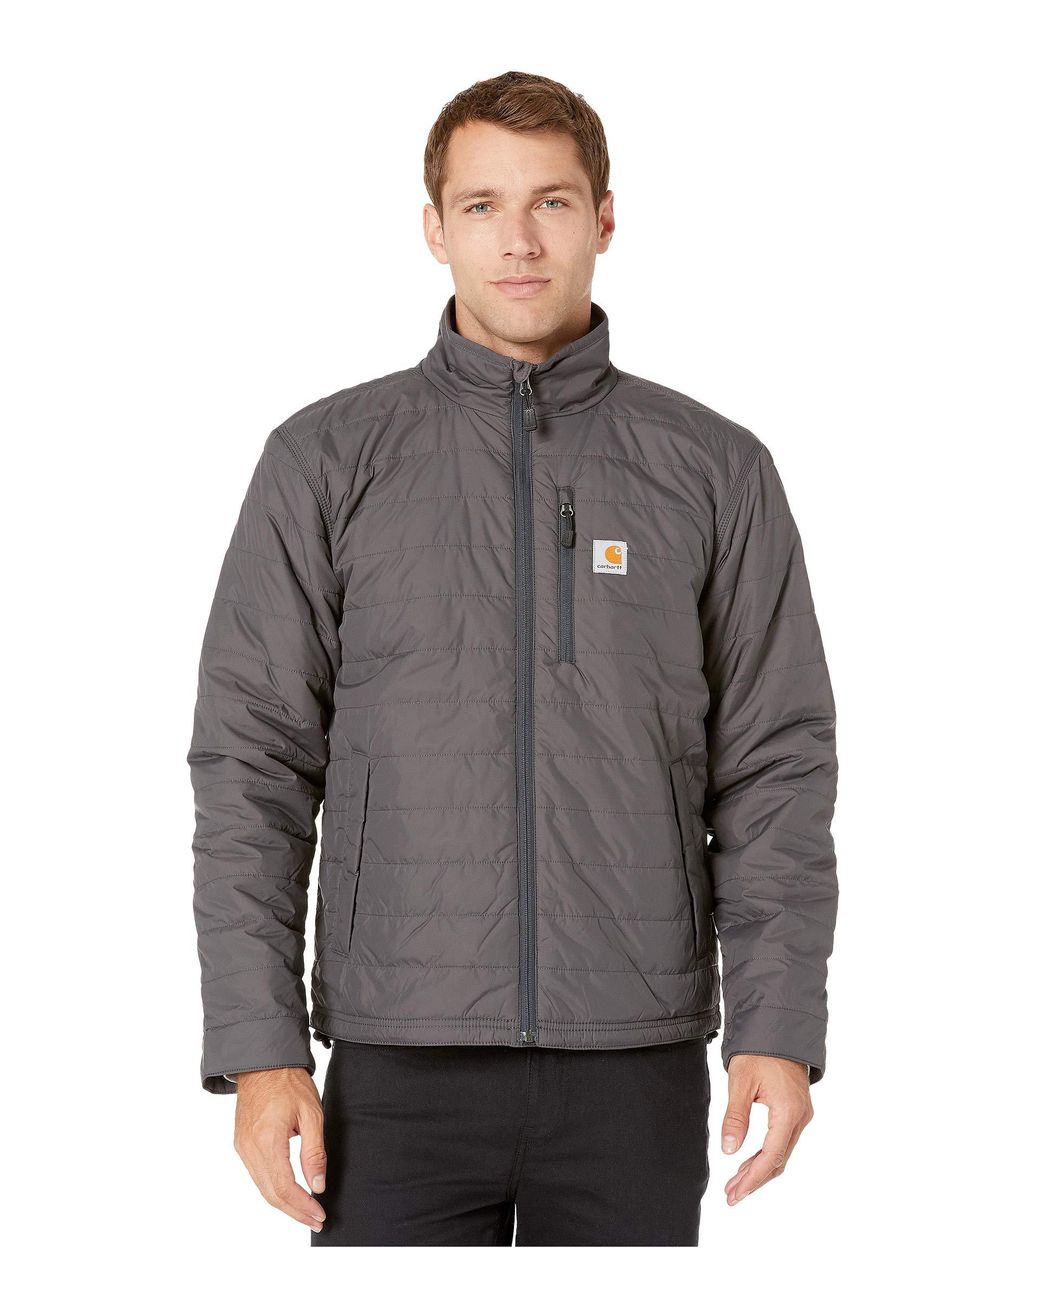 Carhartt Synthetic Gilliam Jacket in Brown for Men - Lyst